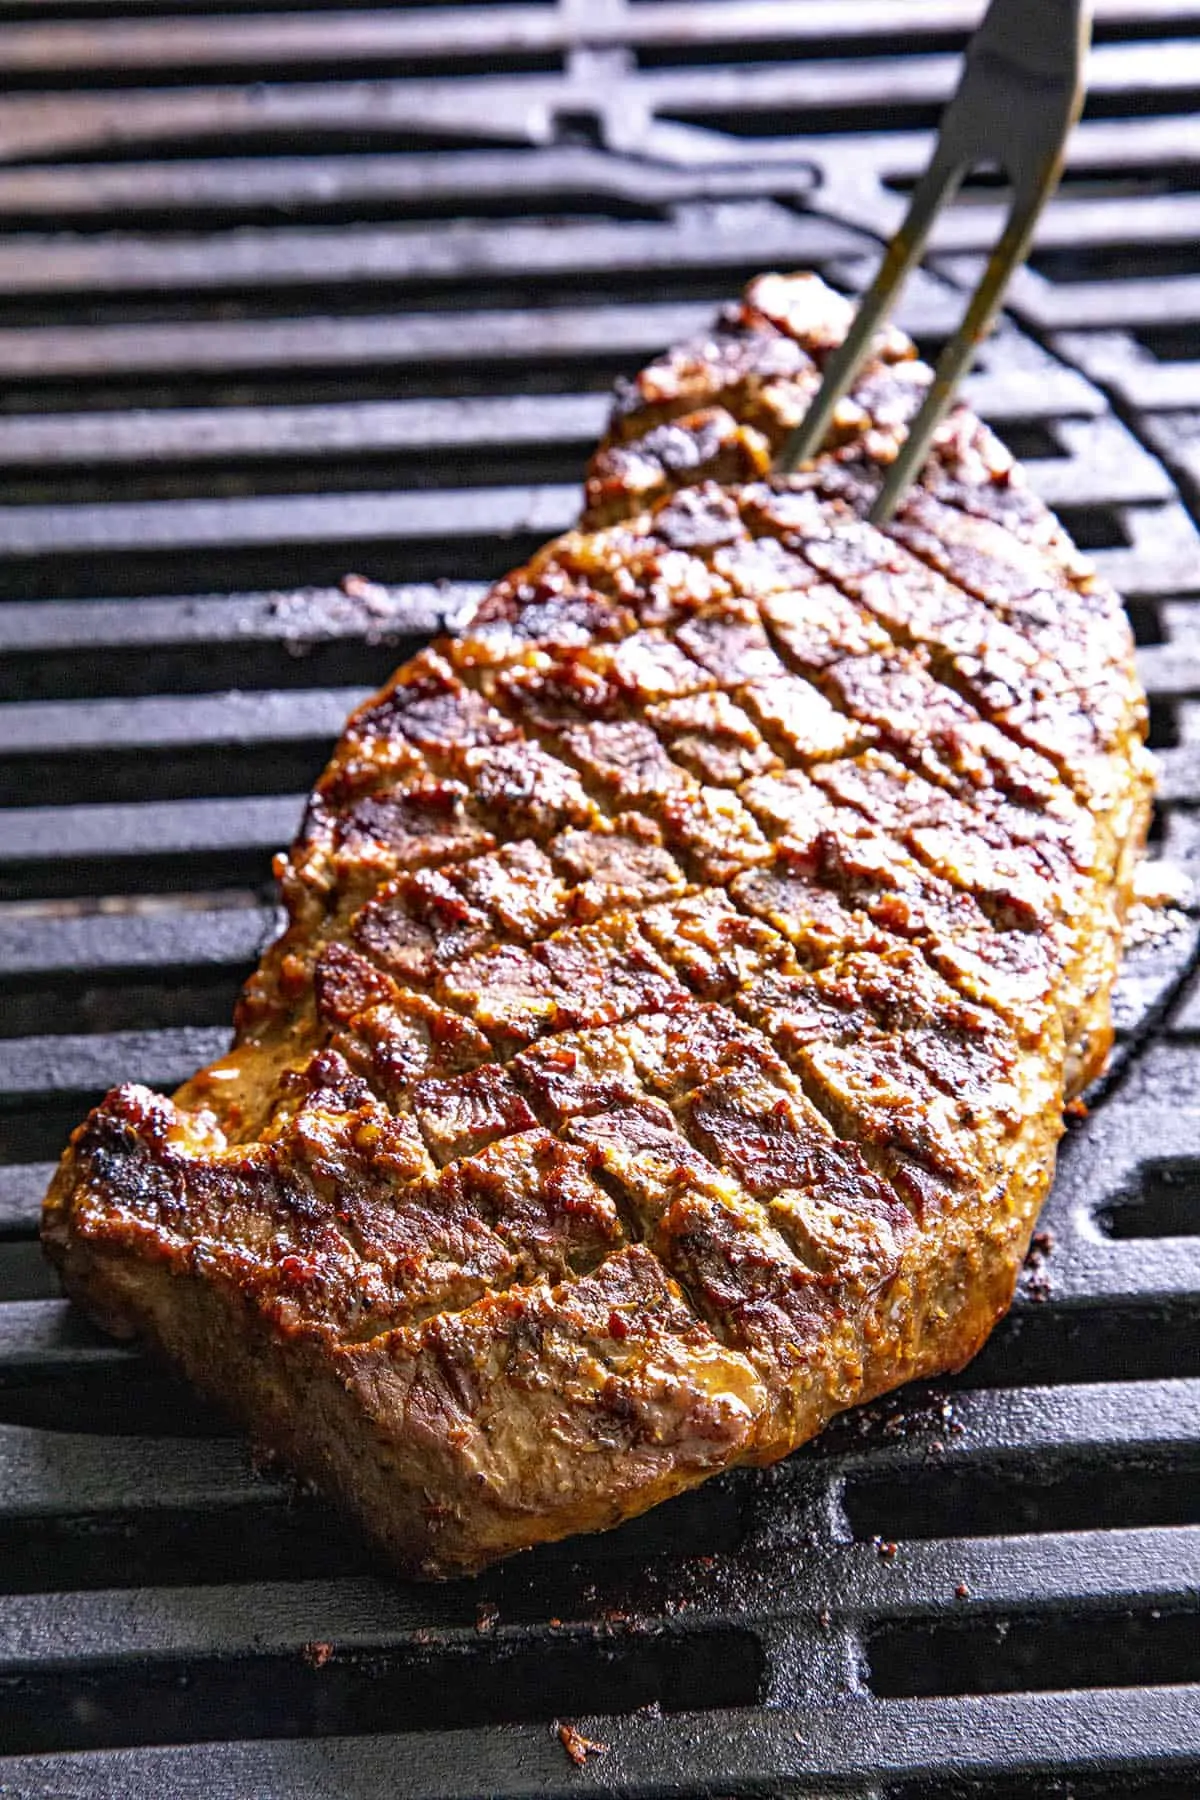 Seared London broil on the grill